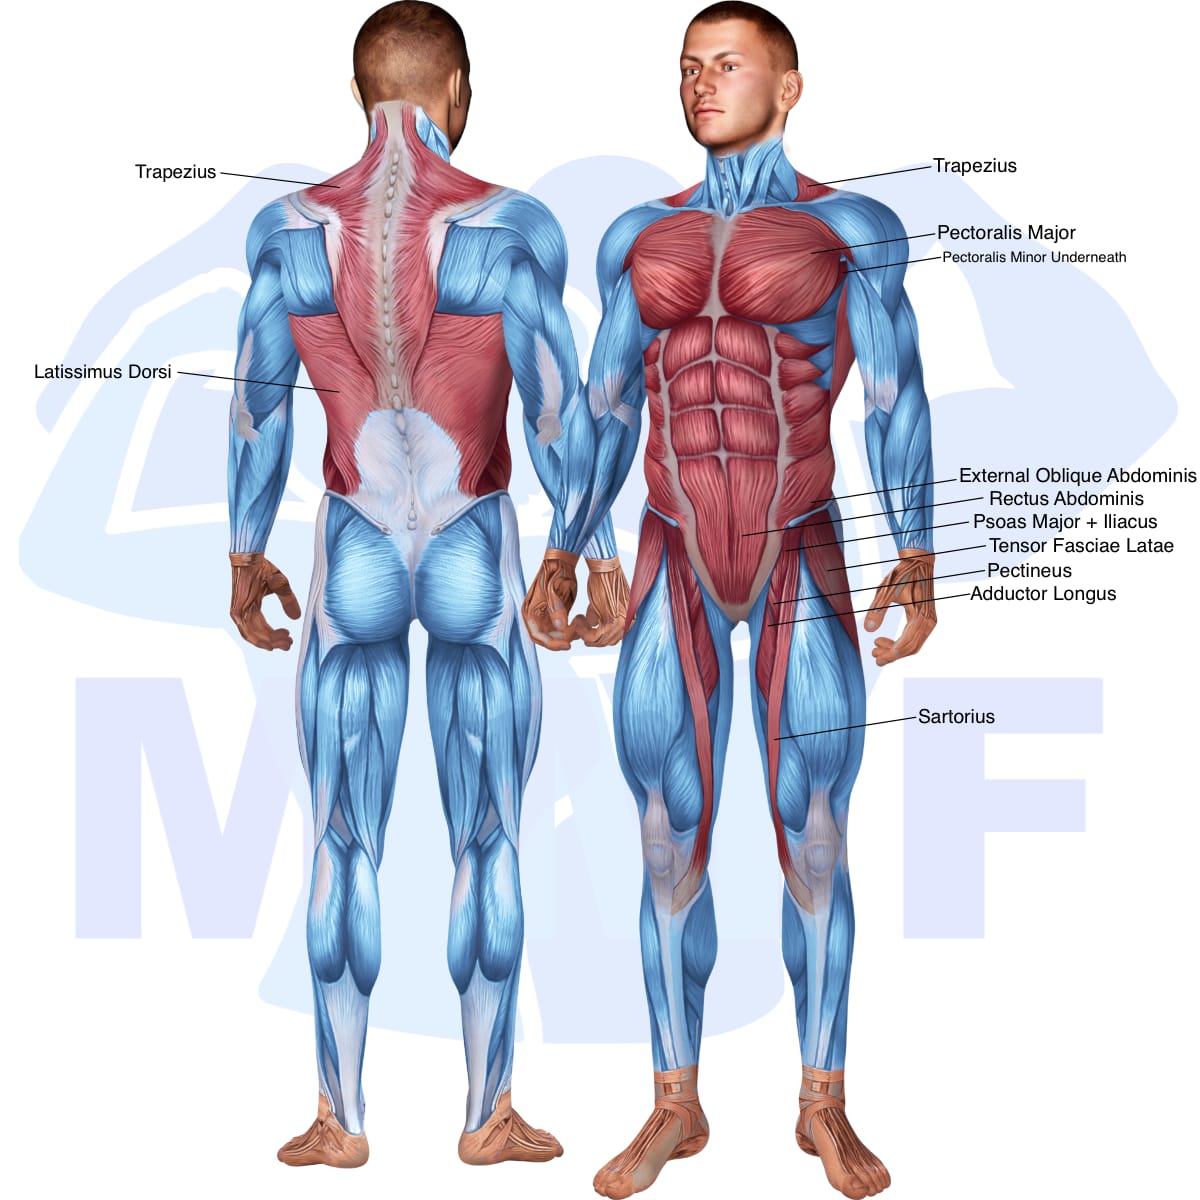 Image of the skeletal muscular system with the muscles used in the parallel bar leg raise exercise highlighted in red and the rest in blue.